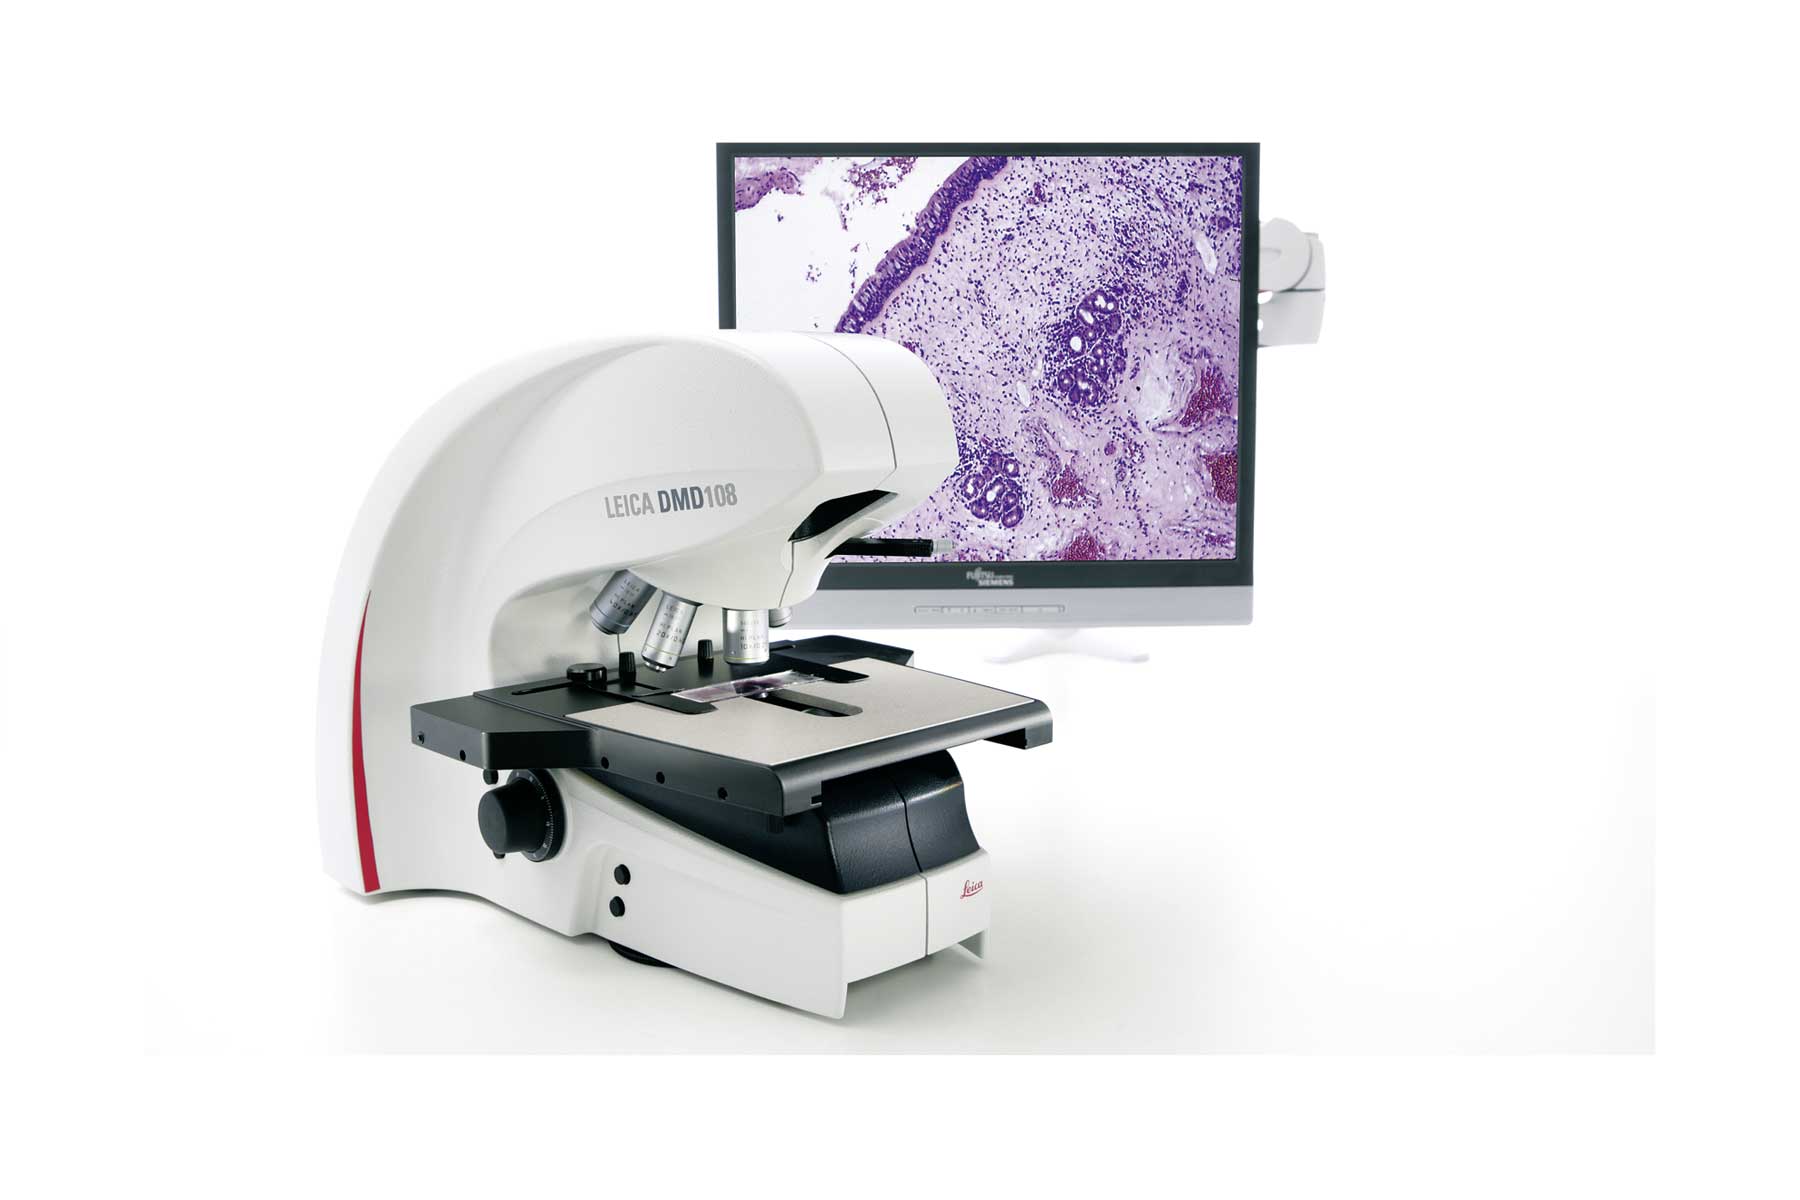 The Leica DMD108 Digital Micro Imaging solution addresses the growing workload in today’s busy laboratories.